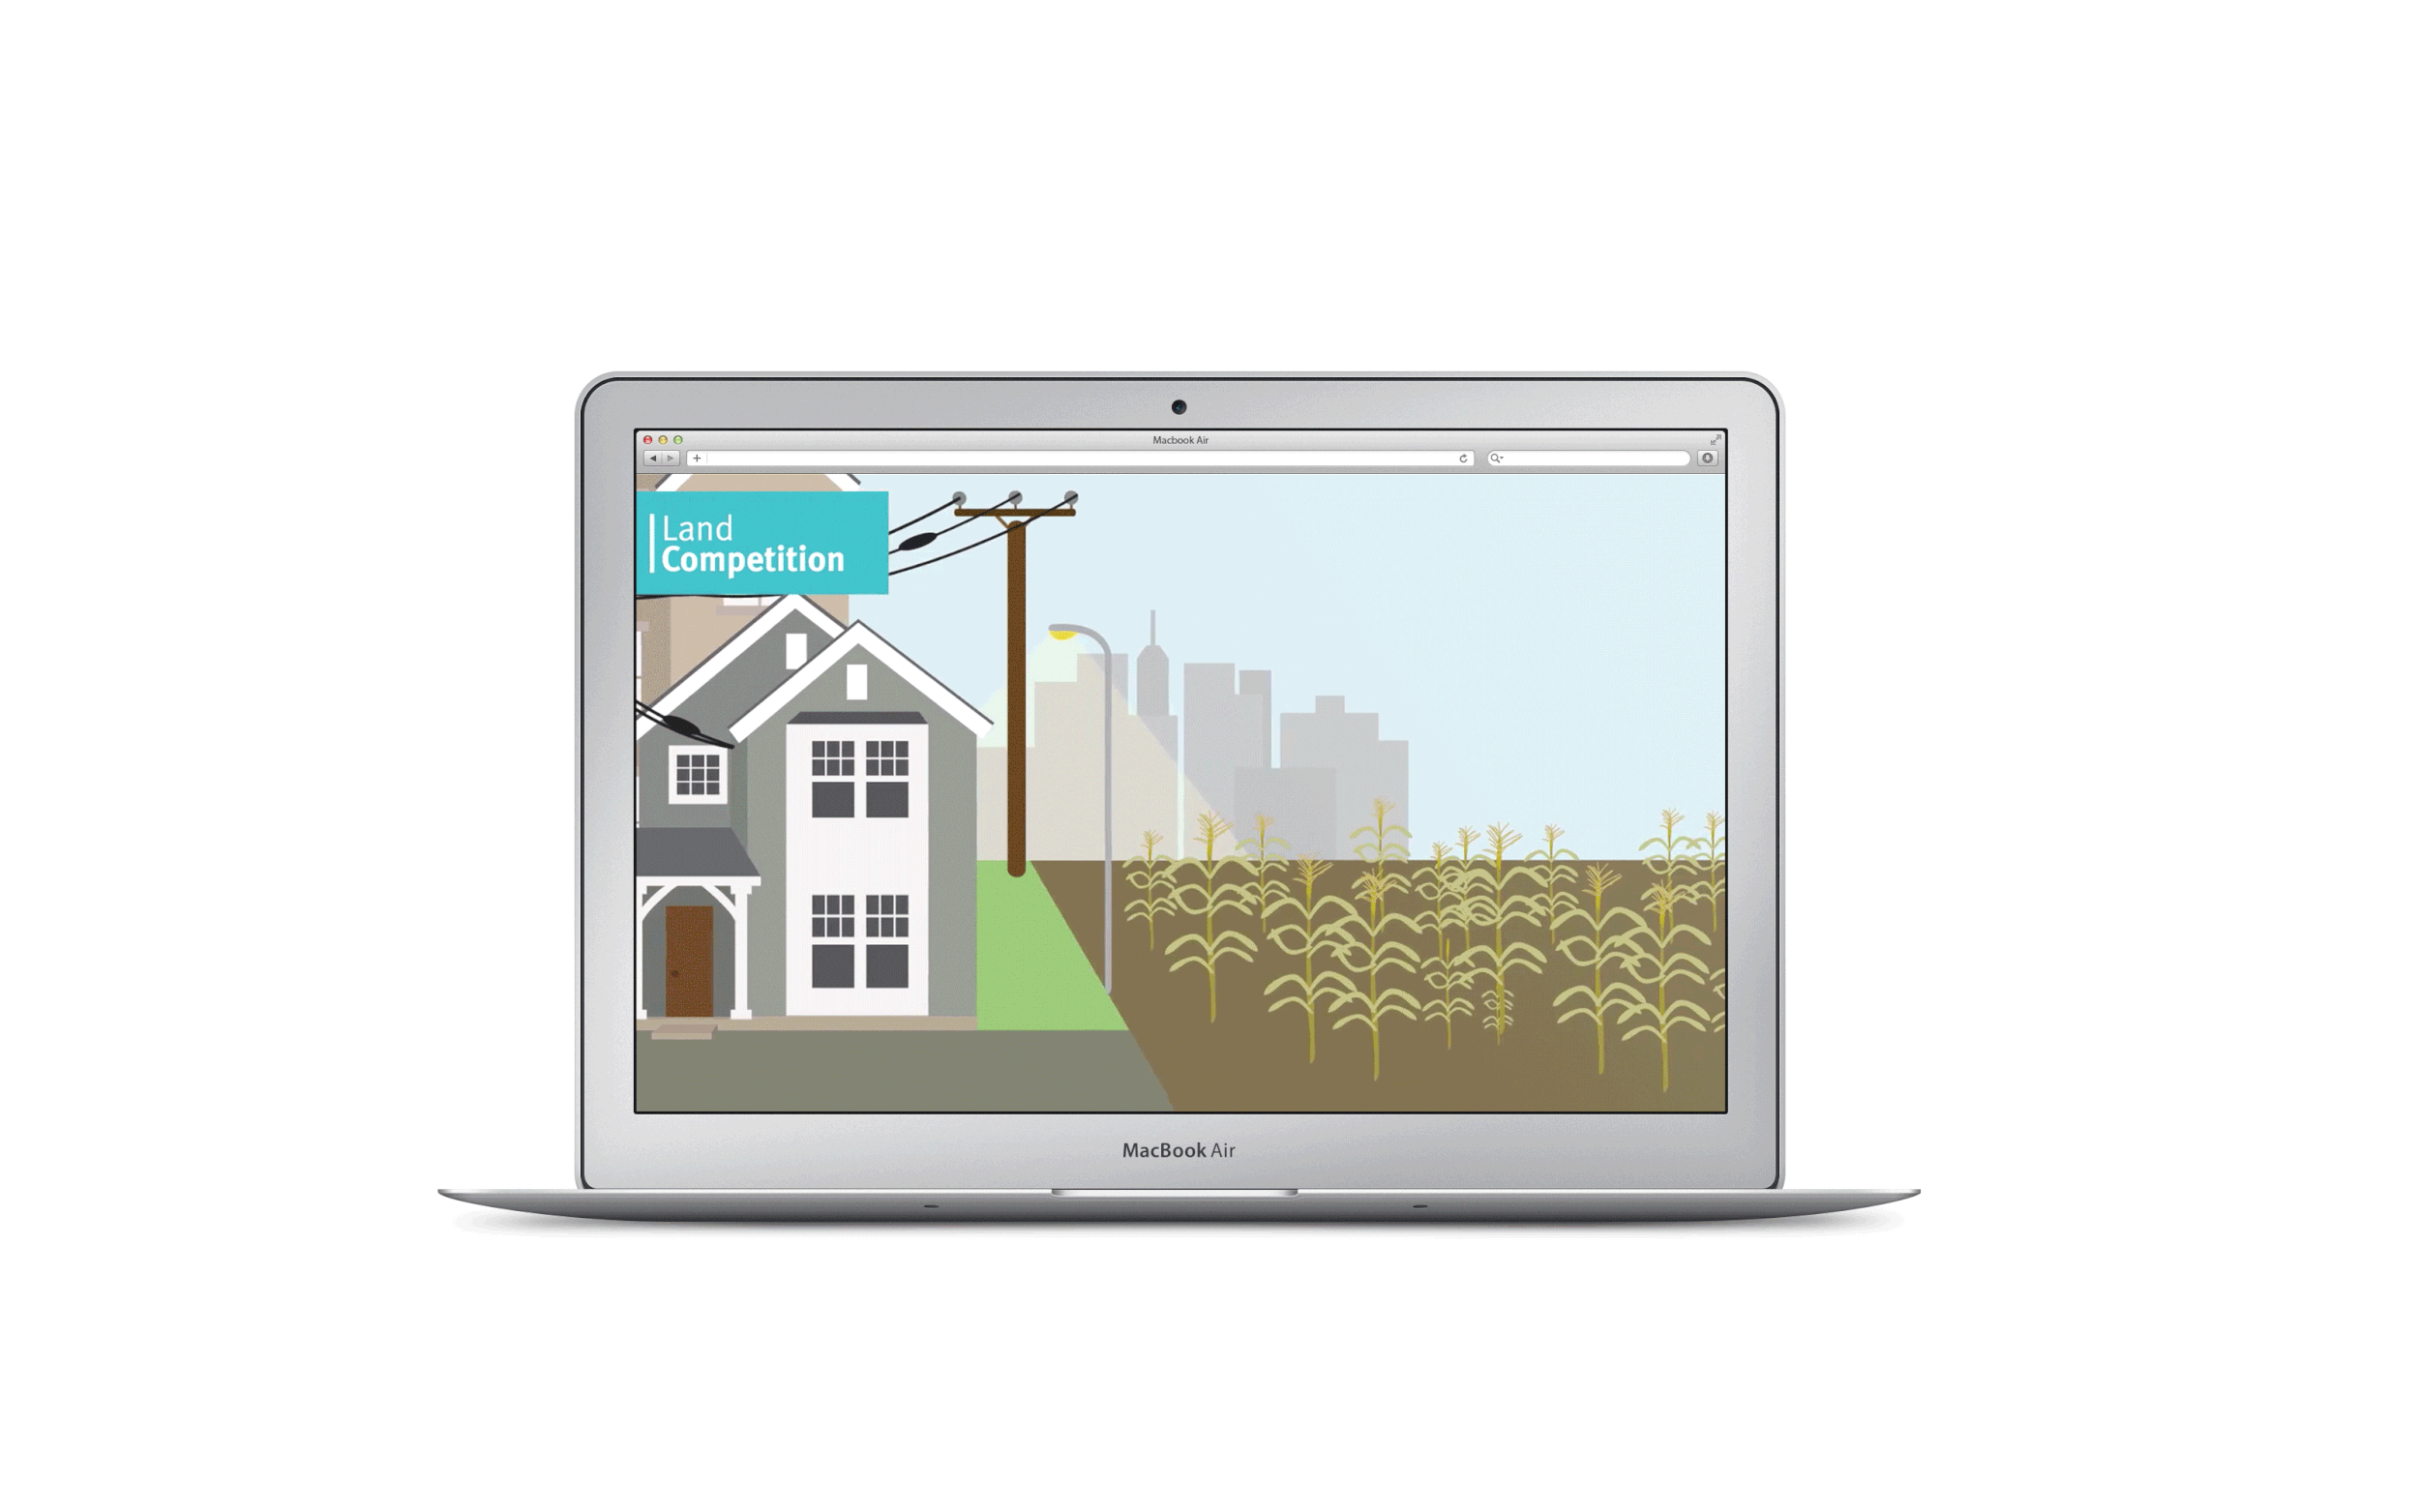 Illustrations for FMC Sustainability Division Video